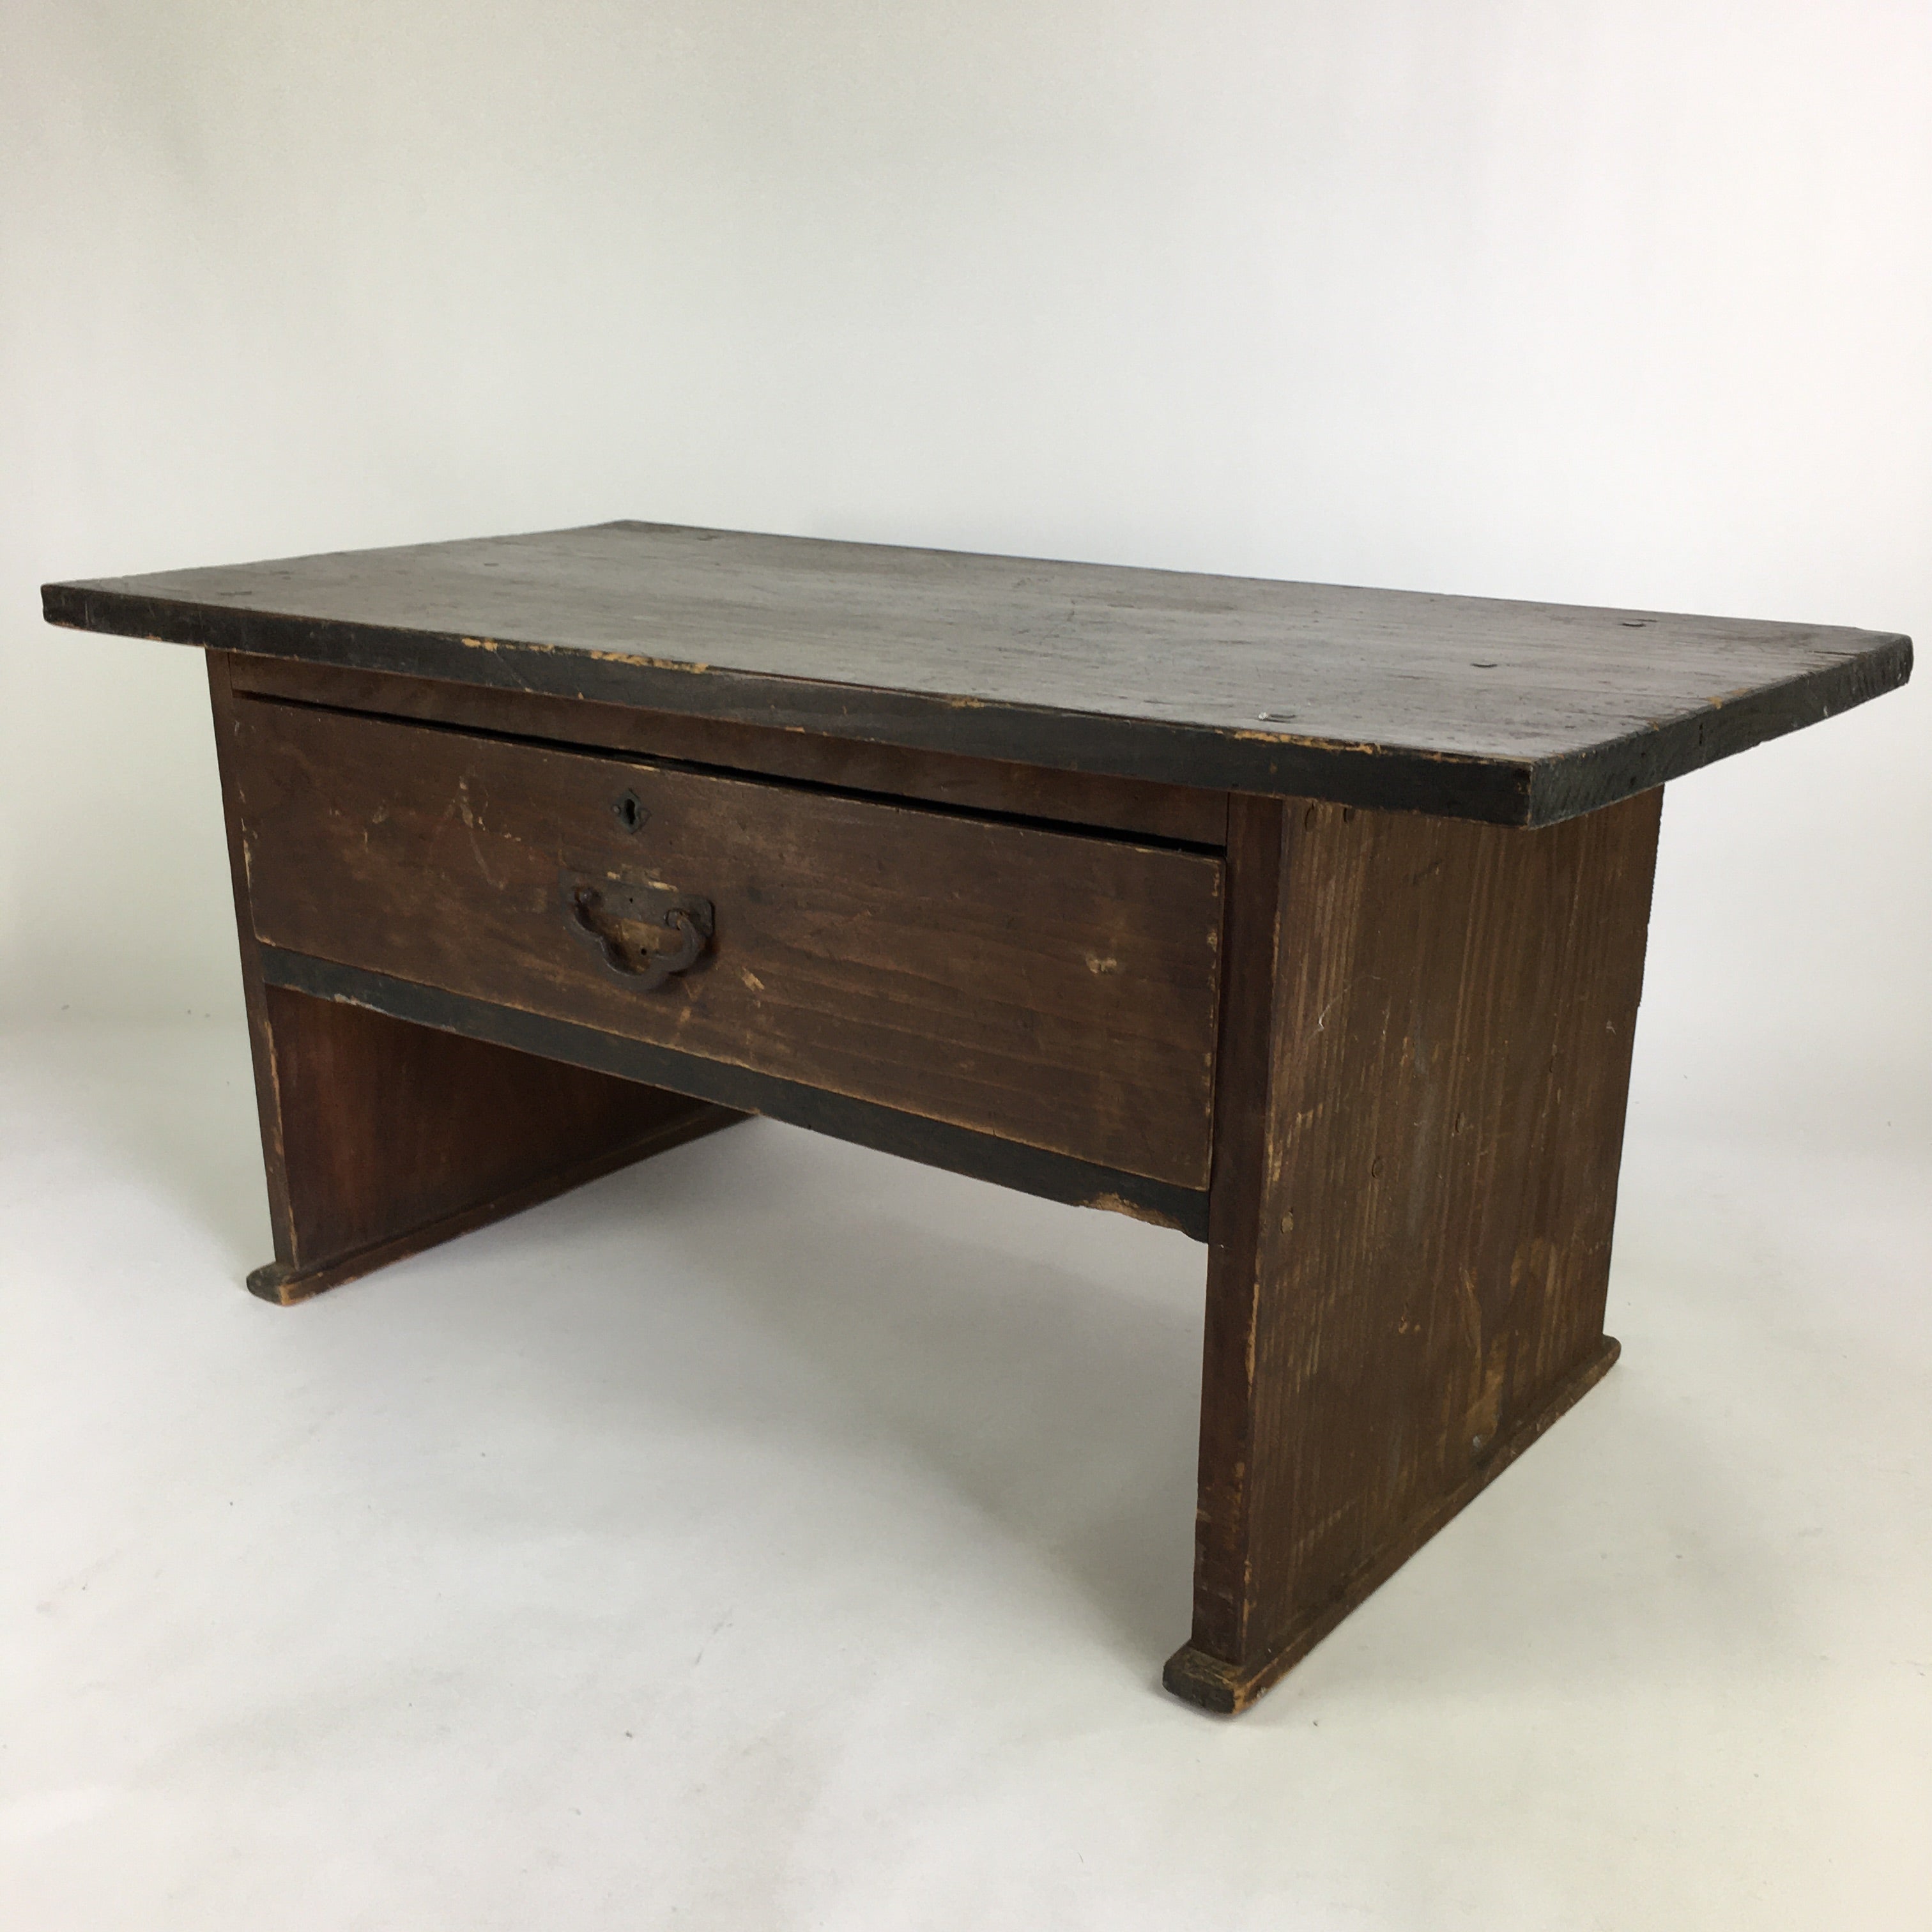 Antique C1900 Japanese Wooden Low Desk 1 Drawer Brown Iron Handle T309